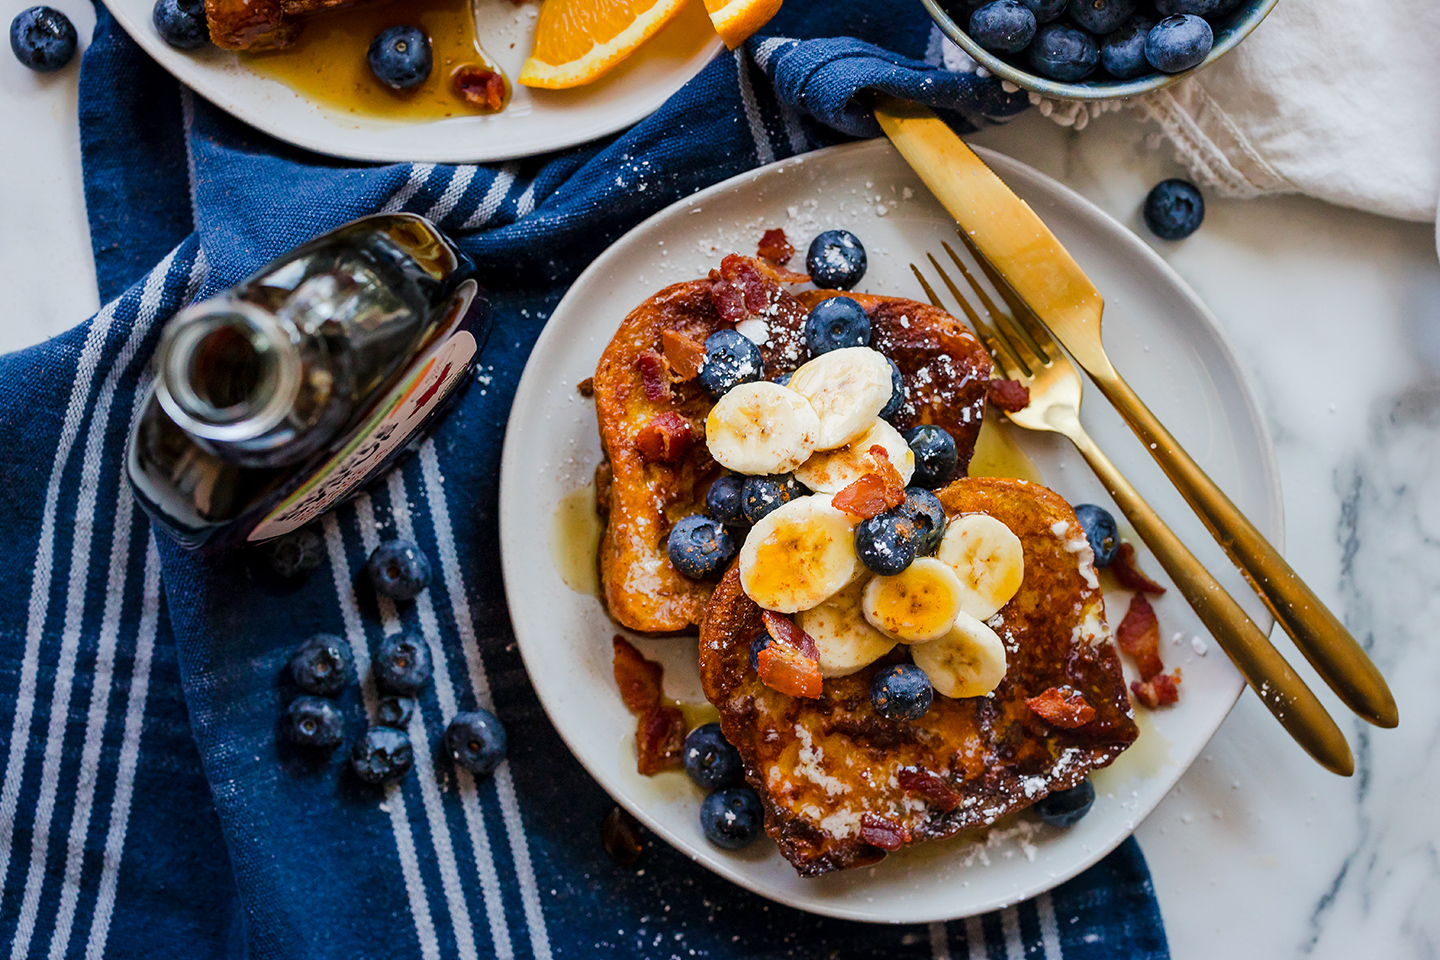 brioche french toast covered in fresh fruit and maple syrup on a plate with fork and knife.